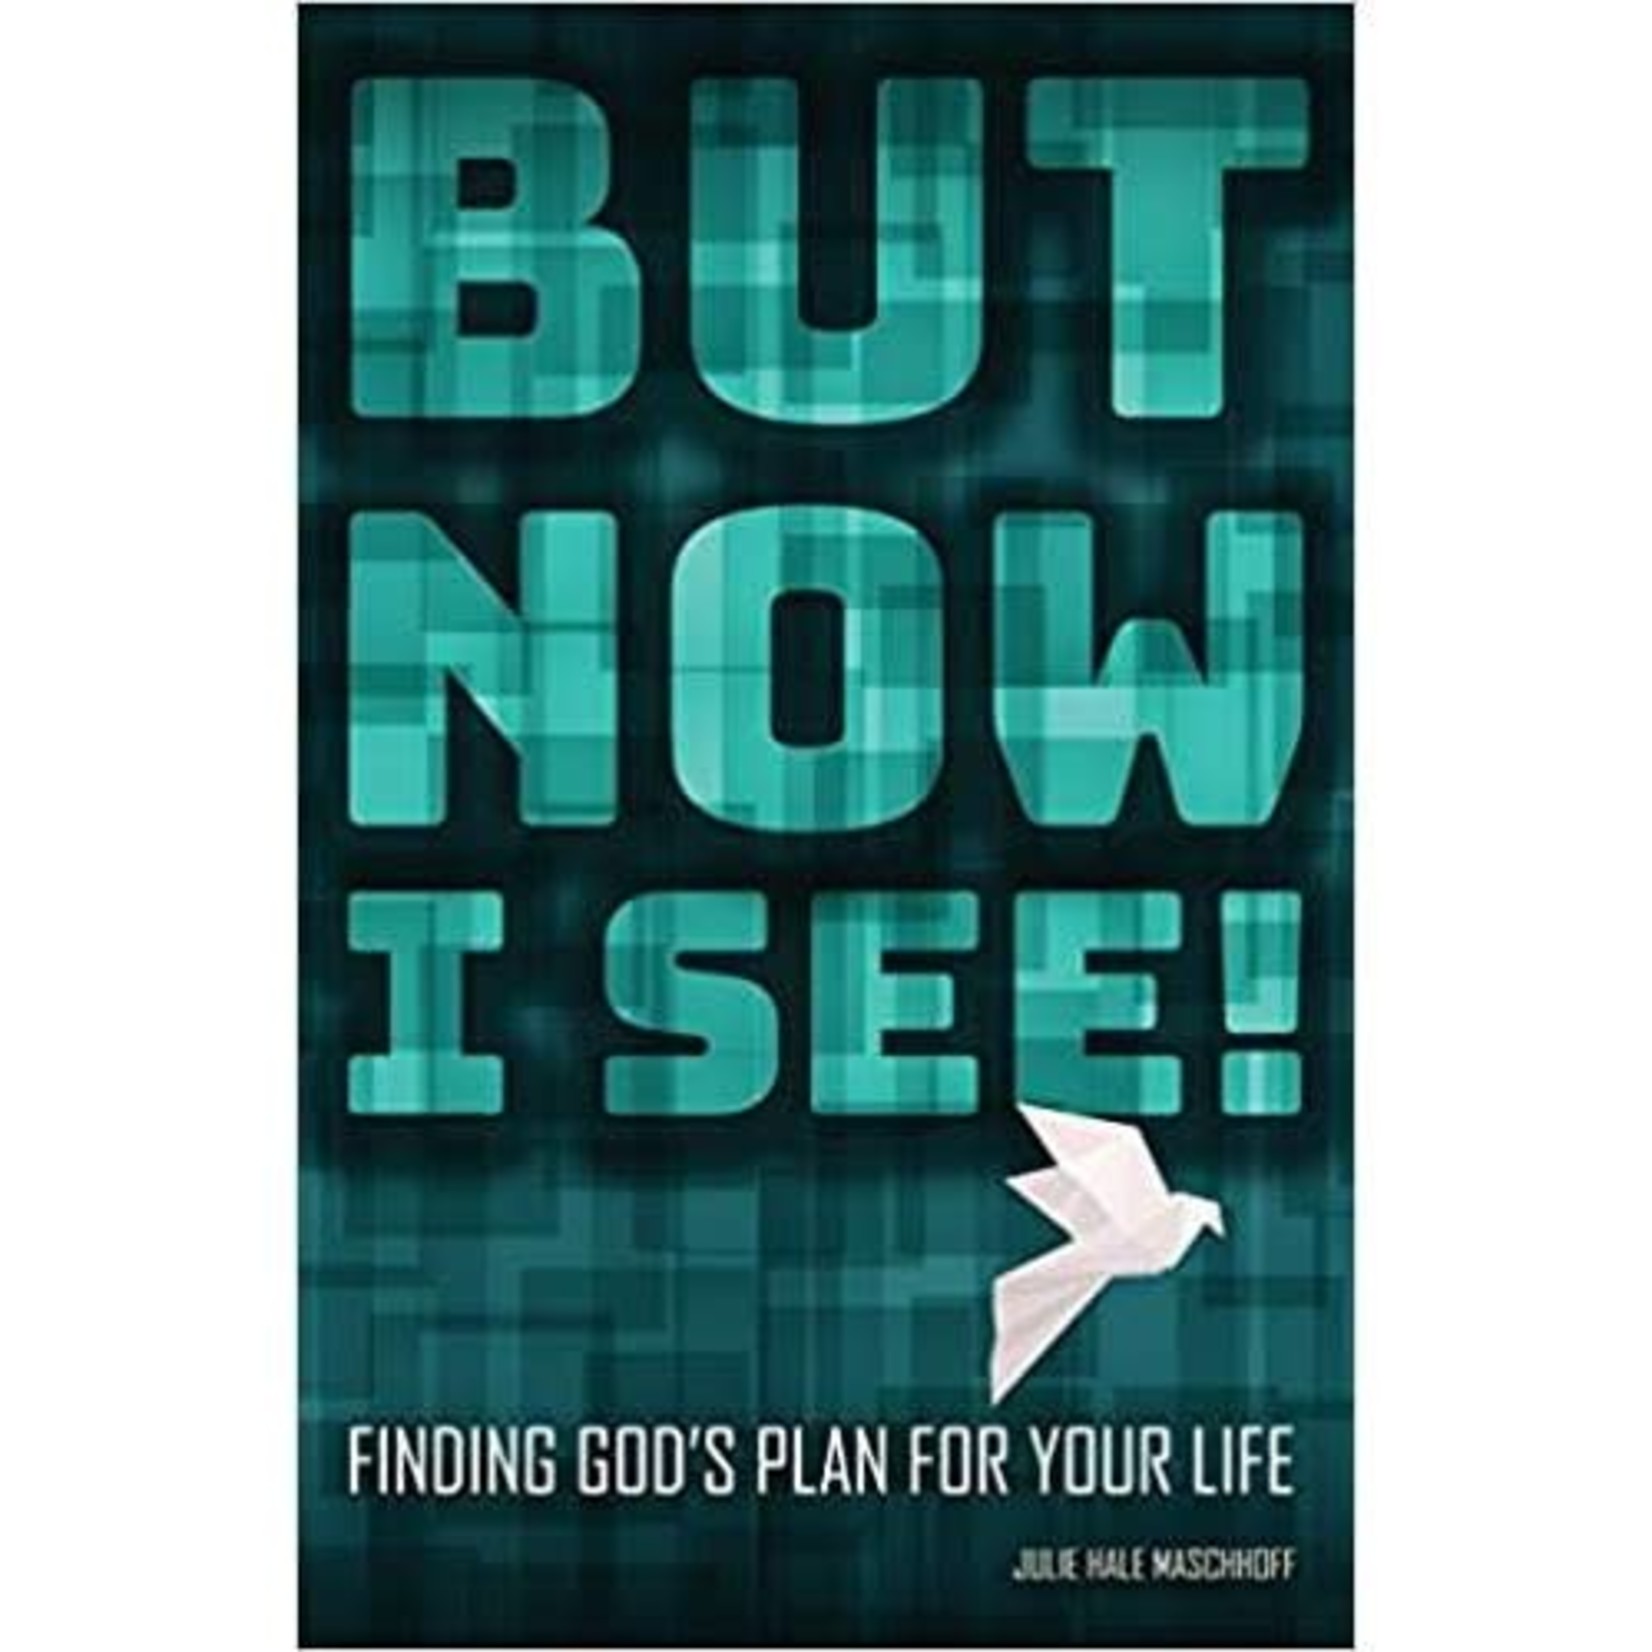 But Now I See - Finding God's Plan For Your Life